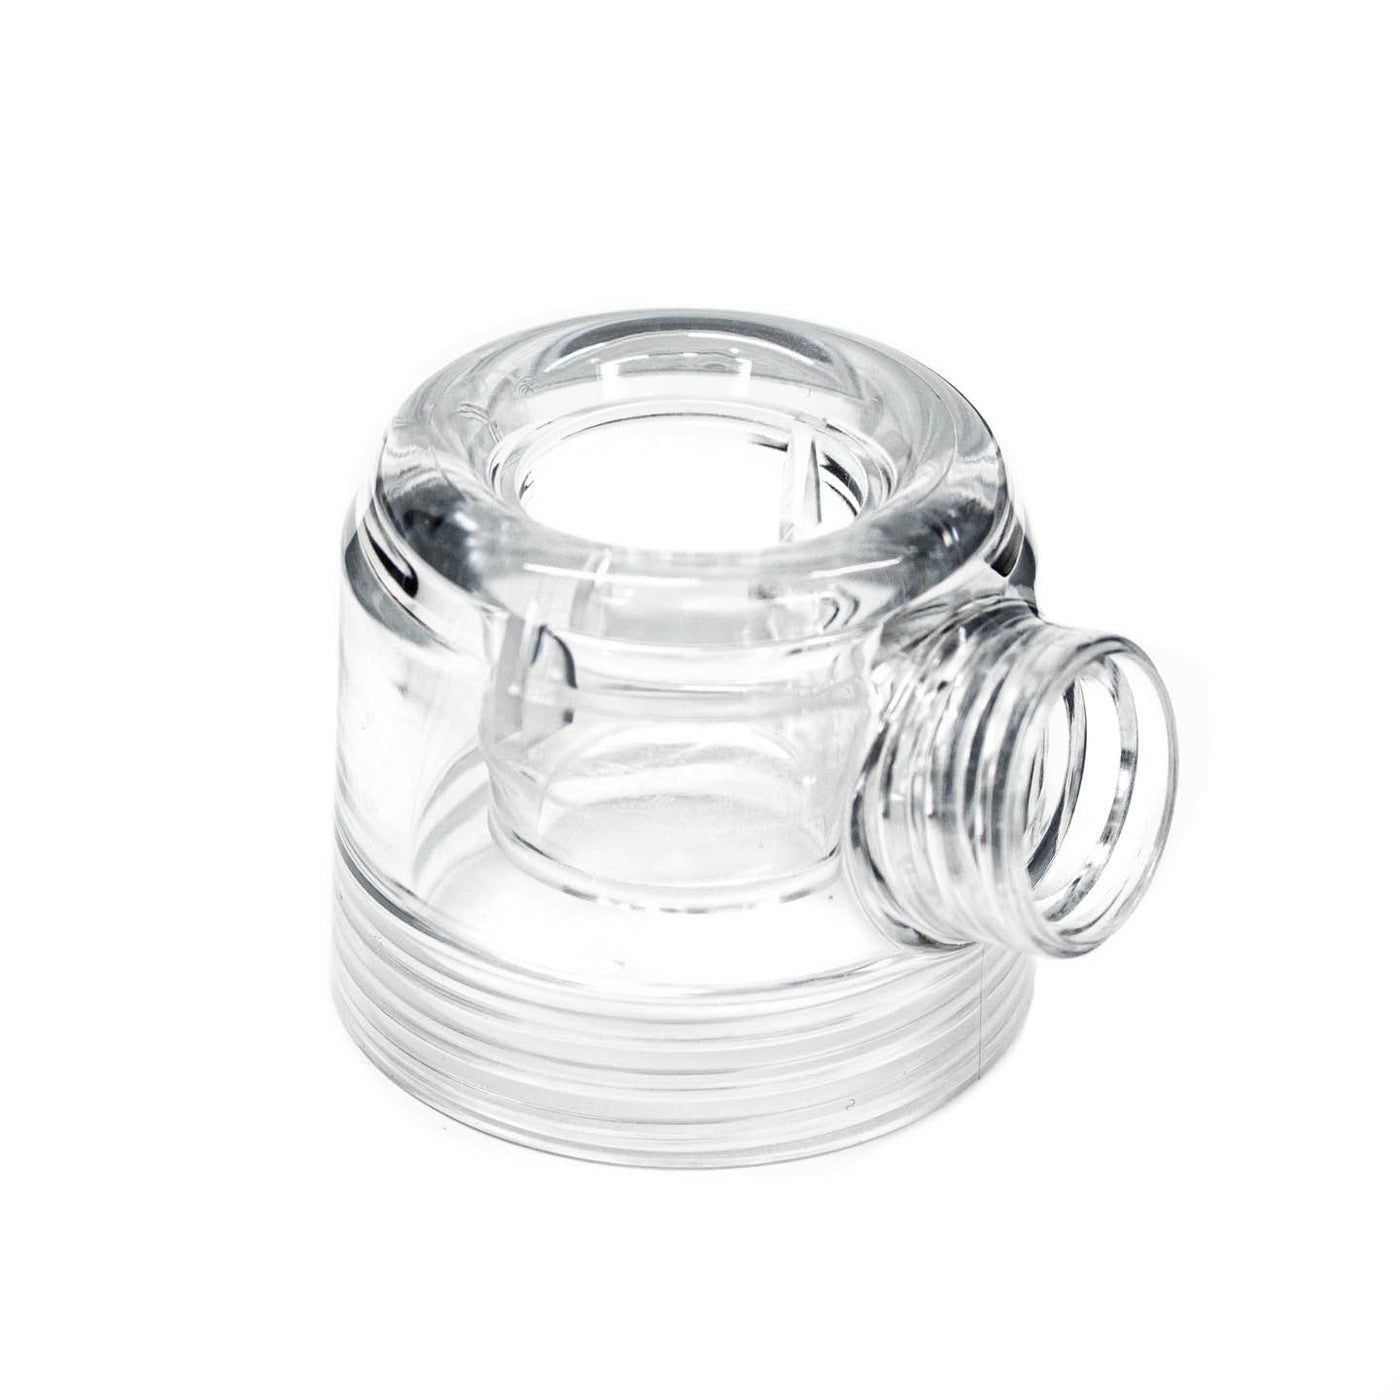 Purr2Go Replacement Chamber Cap